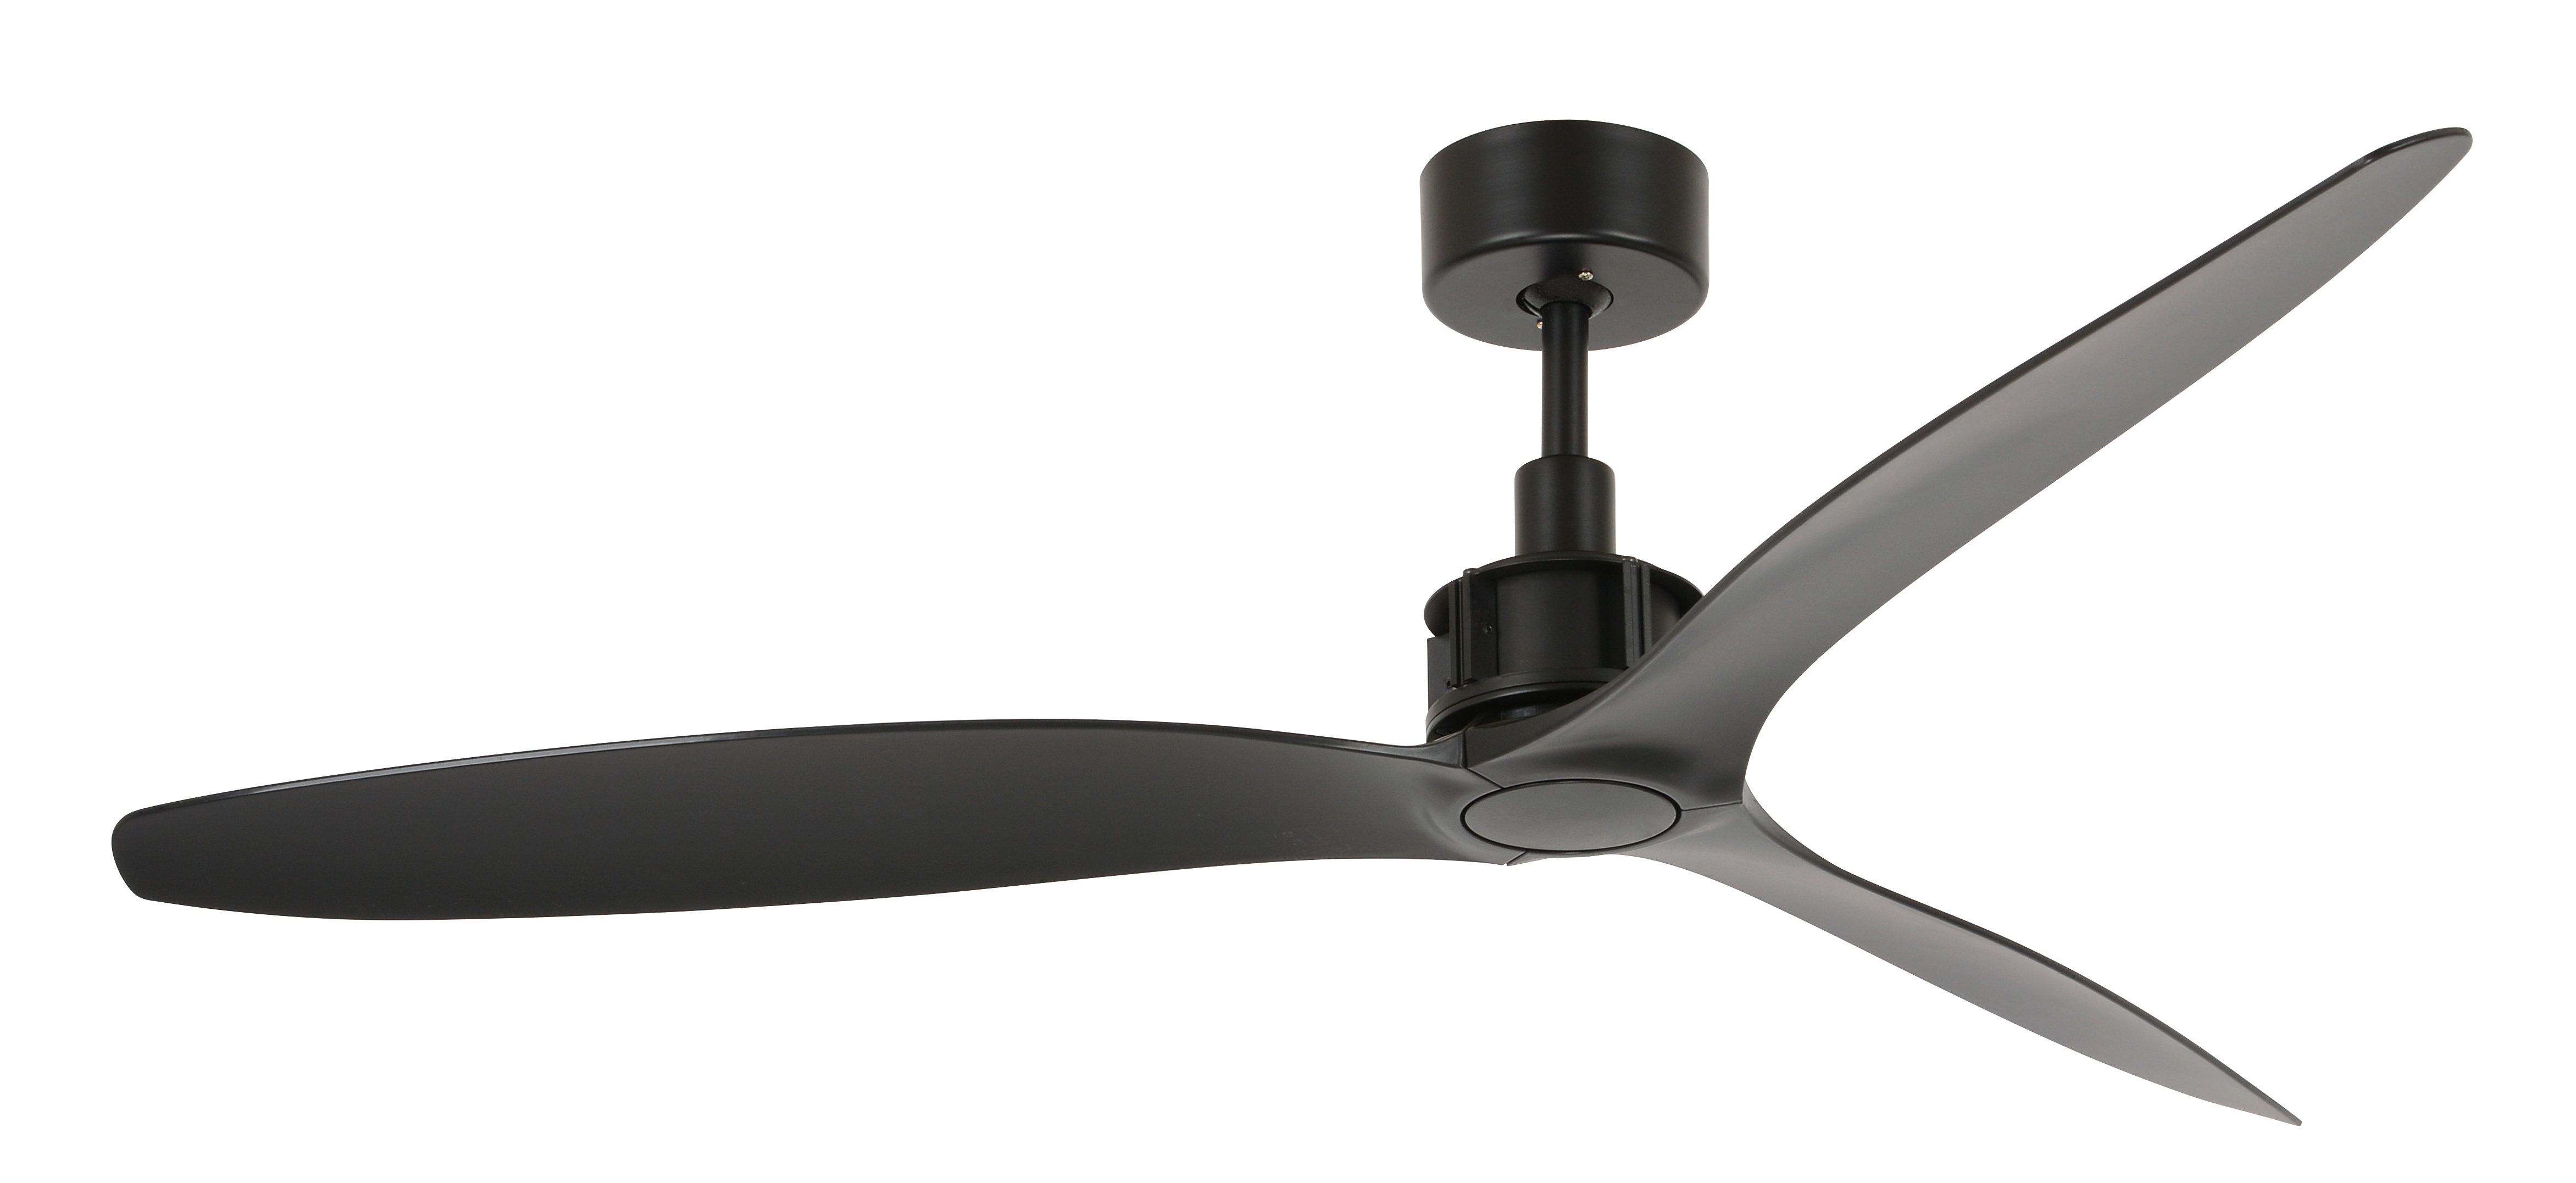 Theron 52" Catoe 3 Blade Ceiling Fan With Remote Pertaining To Well Known Rudolph 3 Blade Ceiling Fans (View 9 of 20)